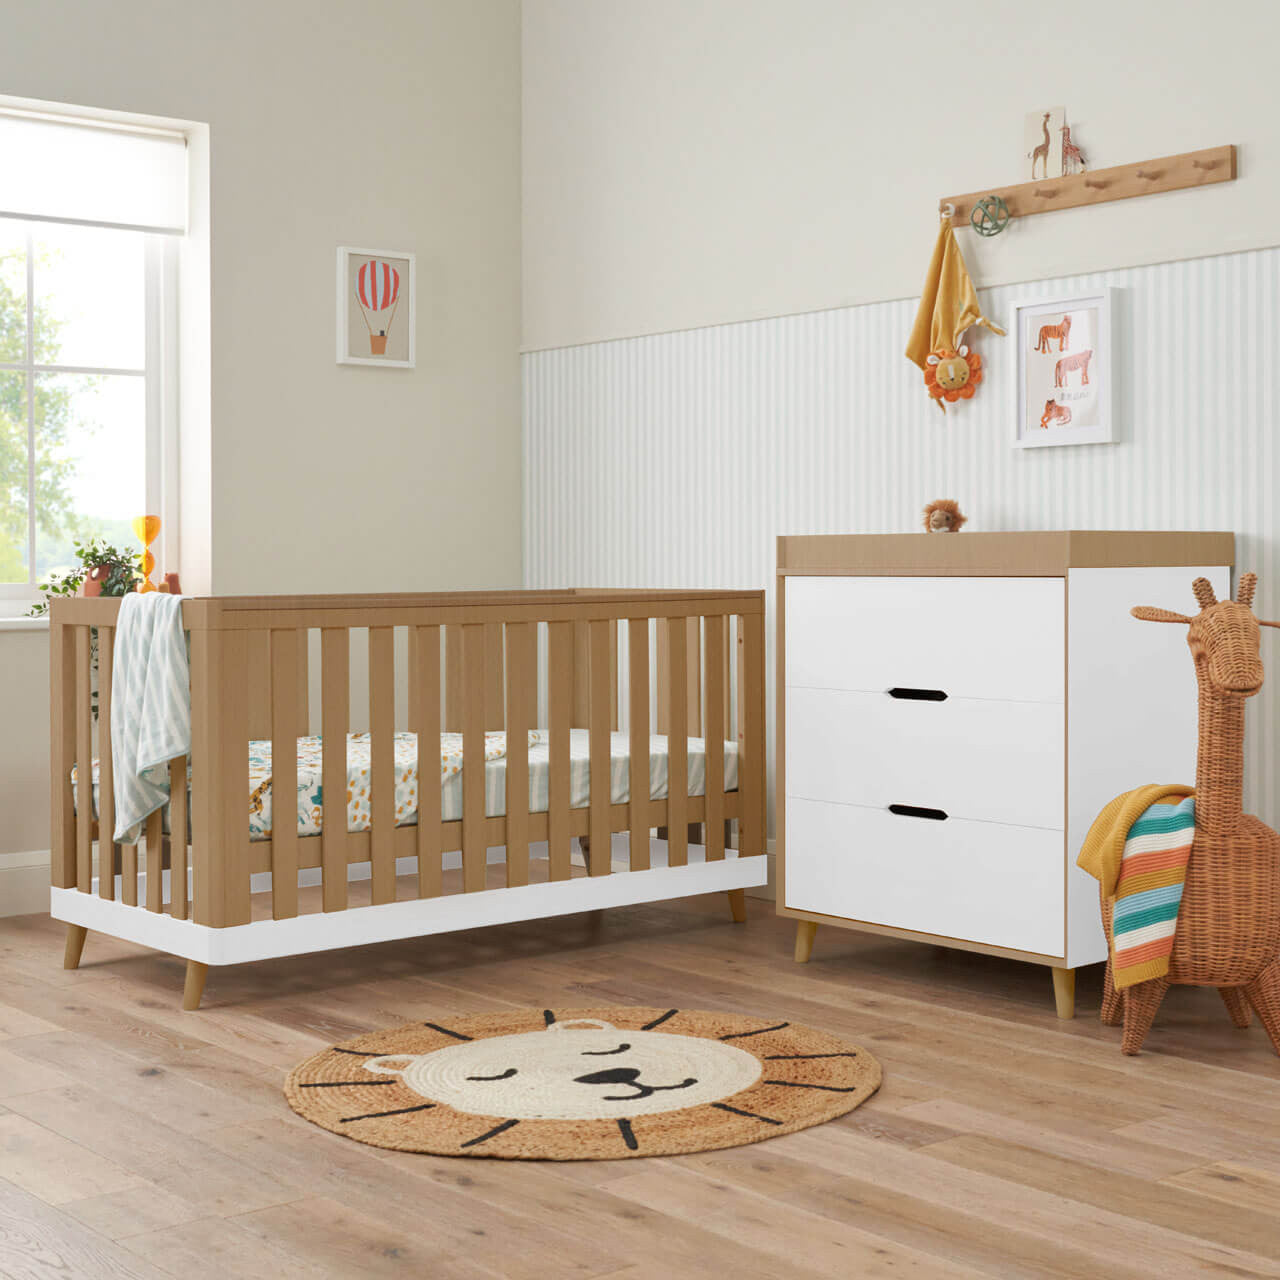 Tutti Bambini Hygge 2 Piece Room Set - White/Light Oak -  | For Your Little One